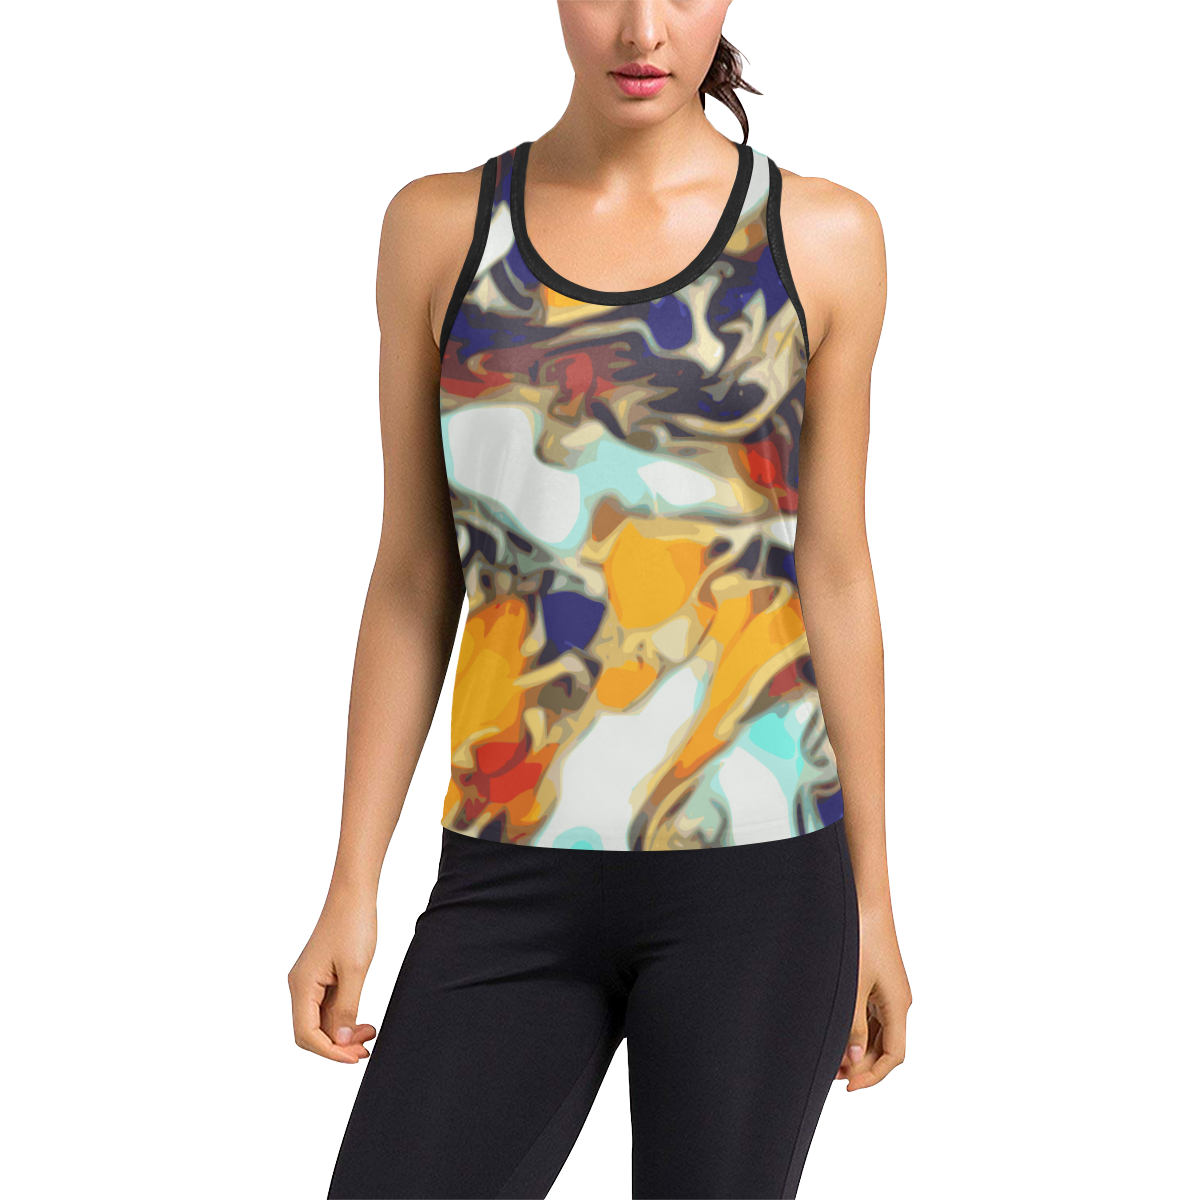 Color Boy - gold white multicolor abstract swirls diy personalize Women's Racerback Tank Top (Model T60)